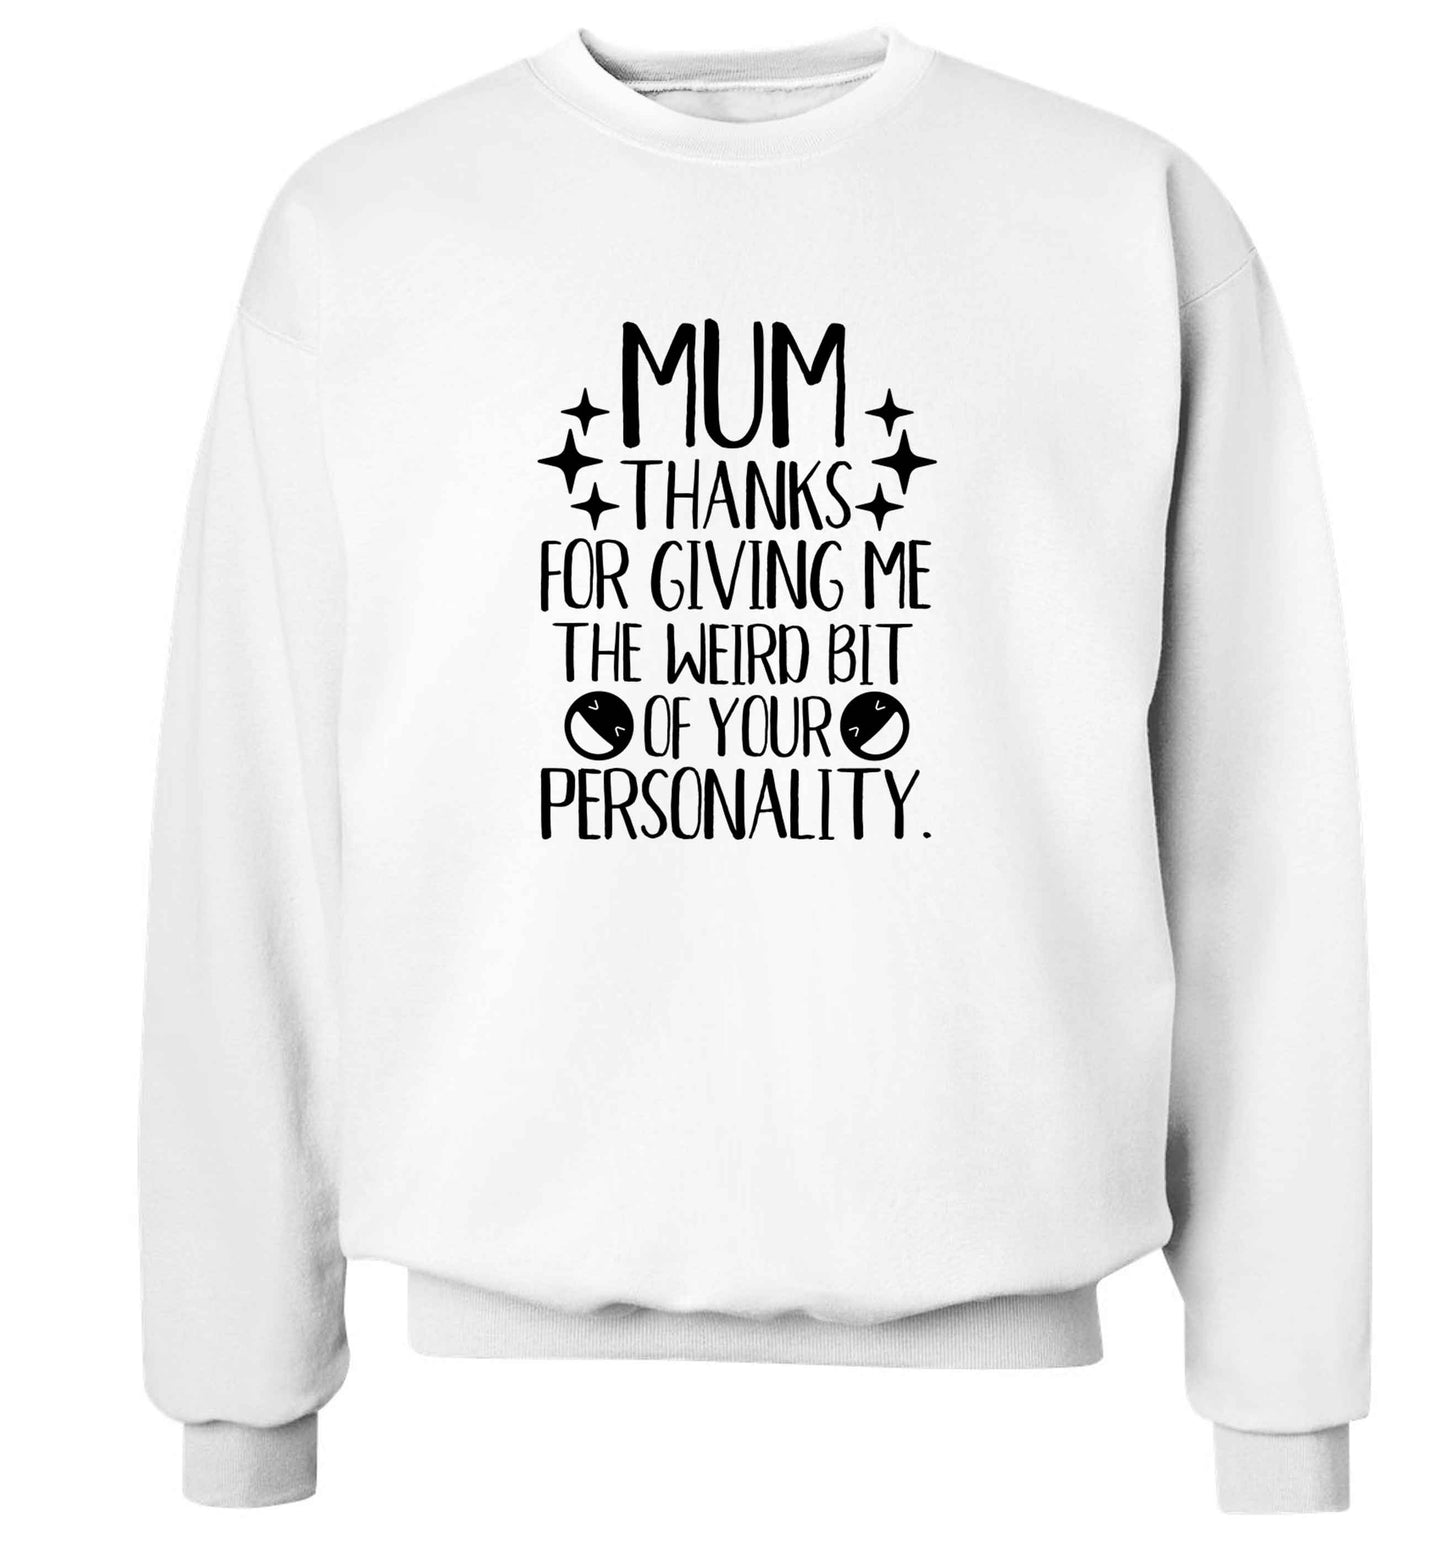 Mum thanks for giving me the weird bit of your personality adult's unisex white sweater 2XL